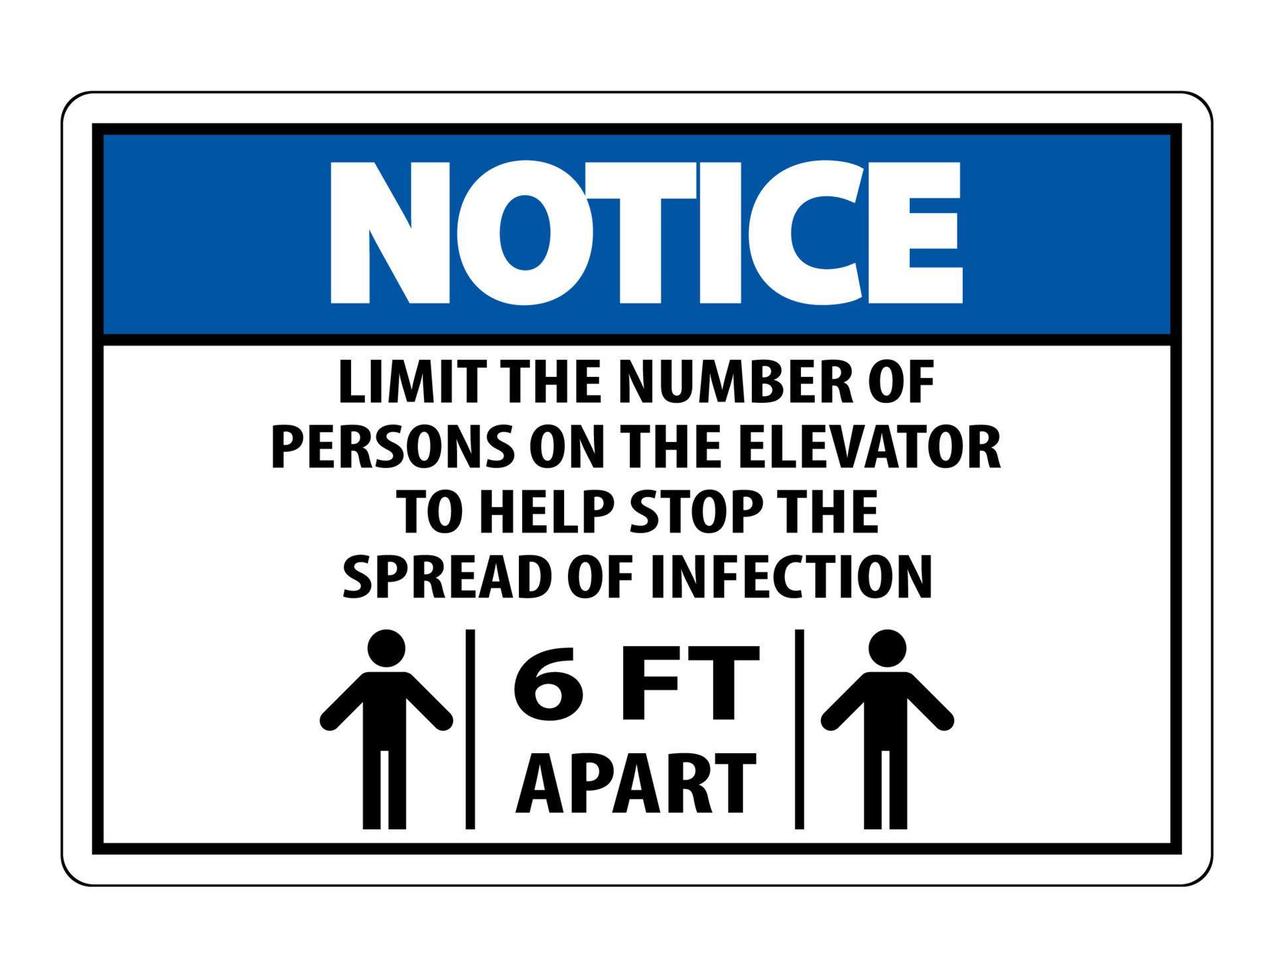 Notice Elevator Physical Distancing Sign Isolate On White Background,Vector Illustration EPS.10 vector